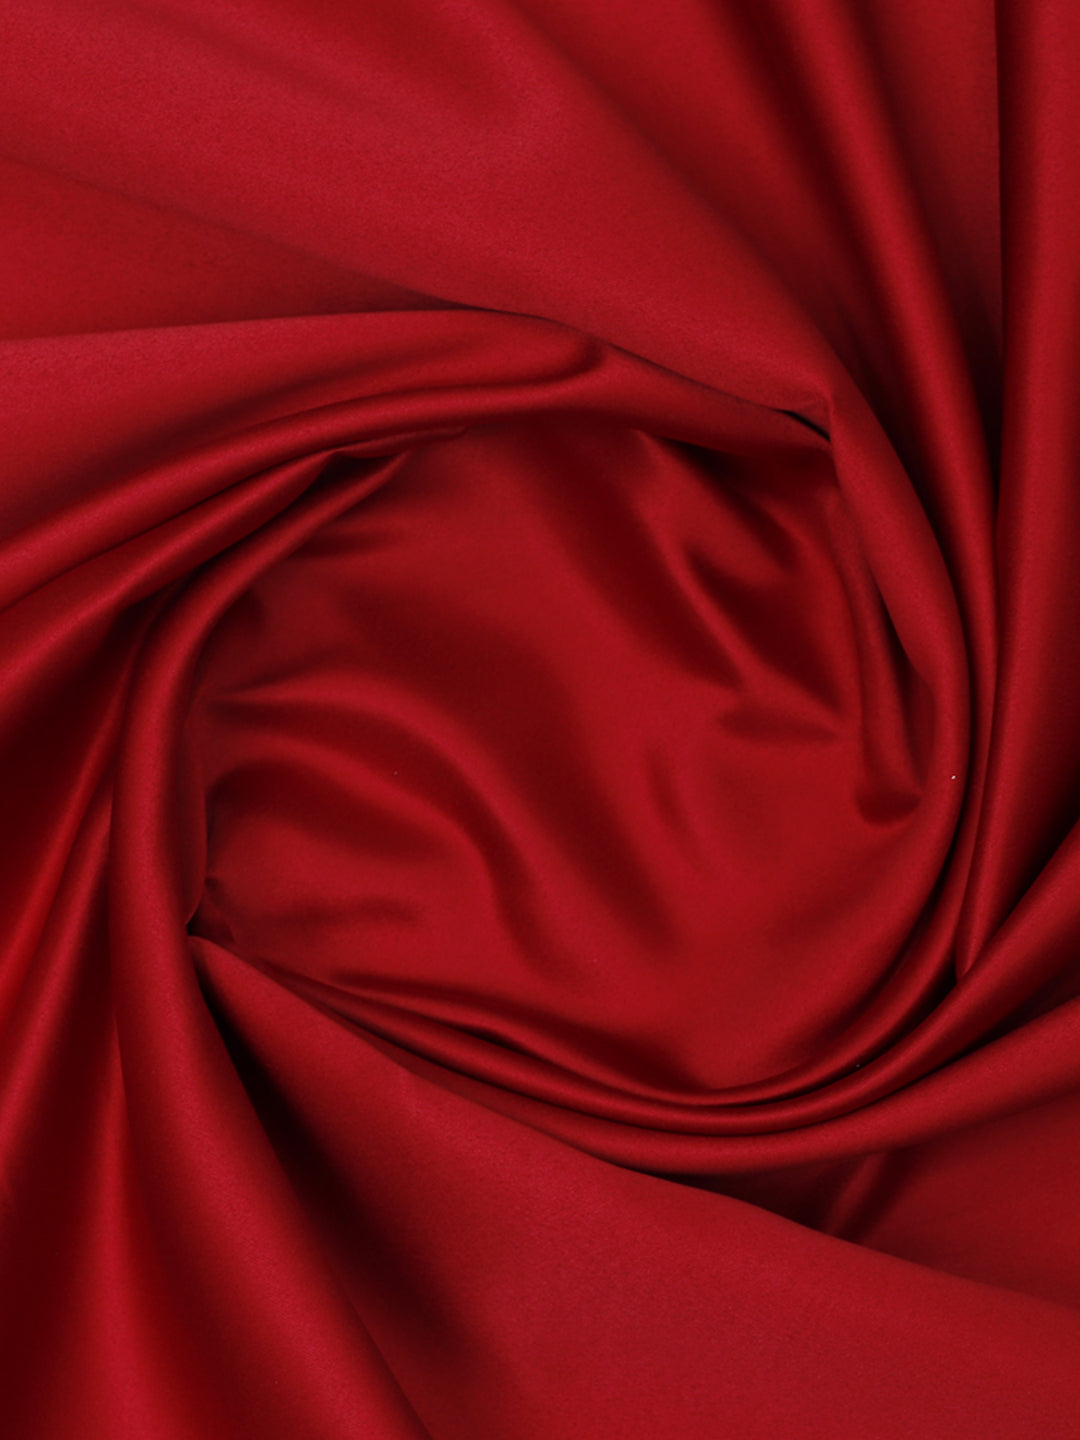 Red Plain Imported Satin Fabric